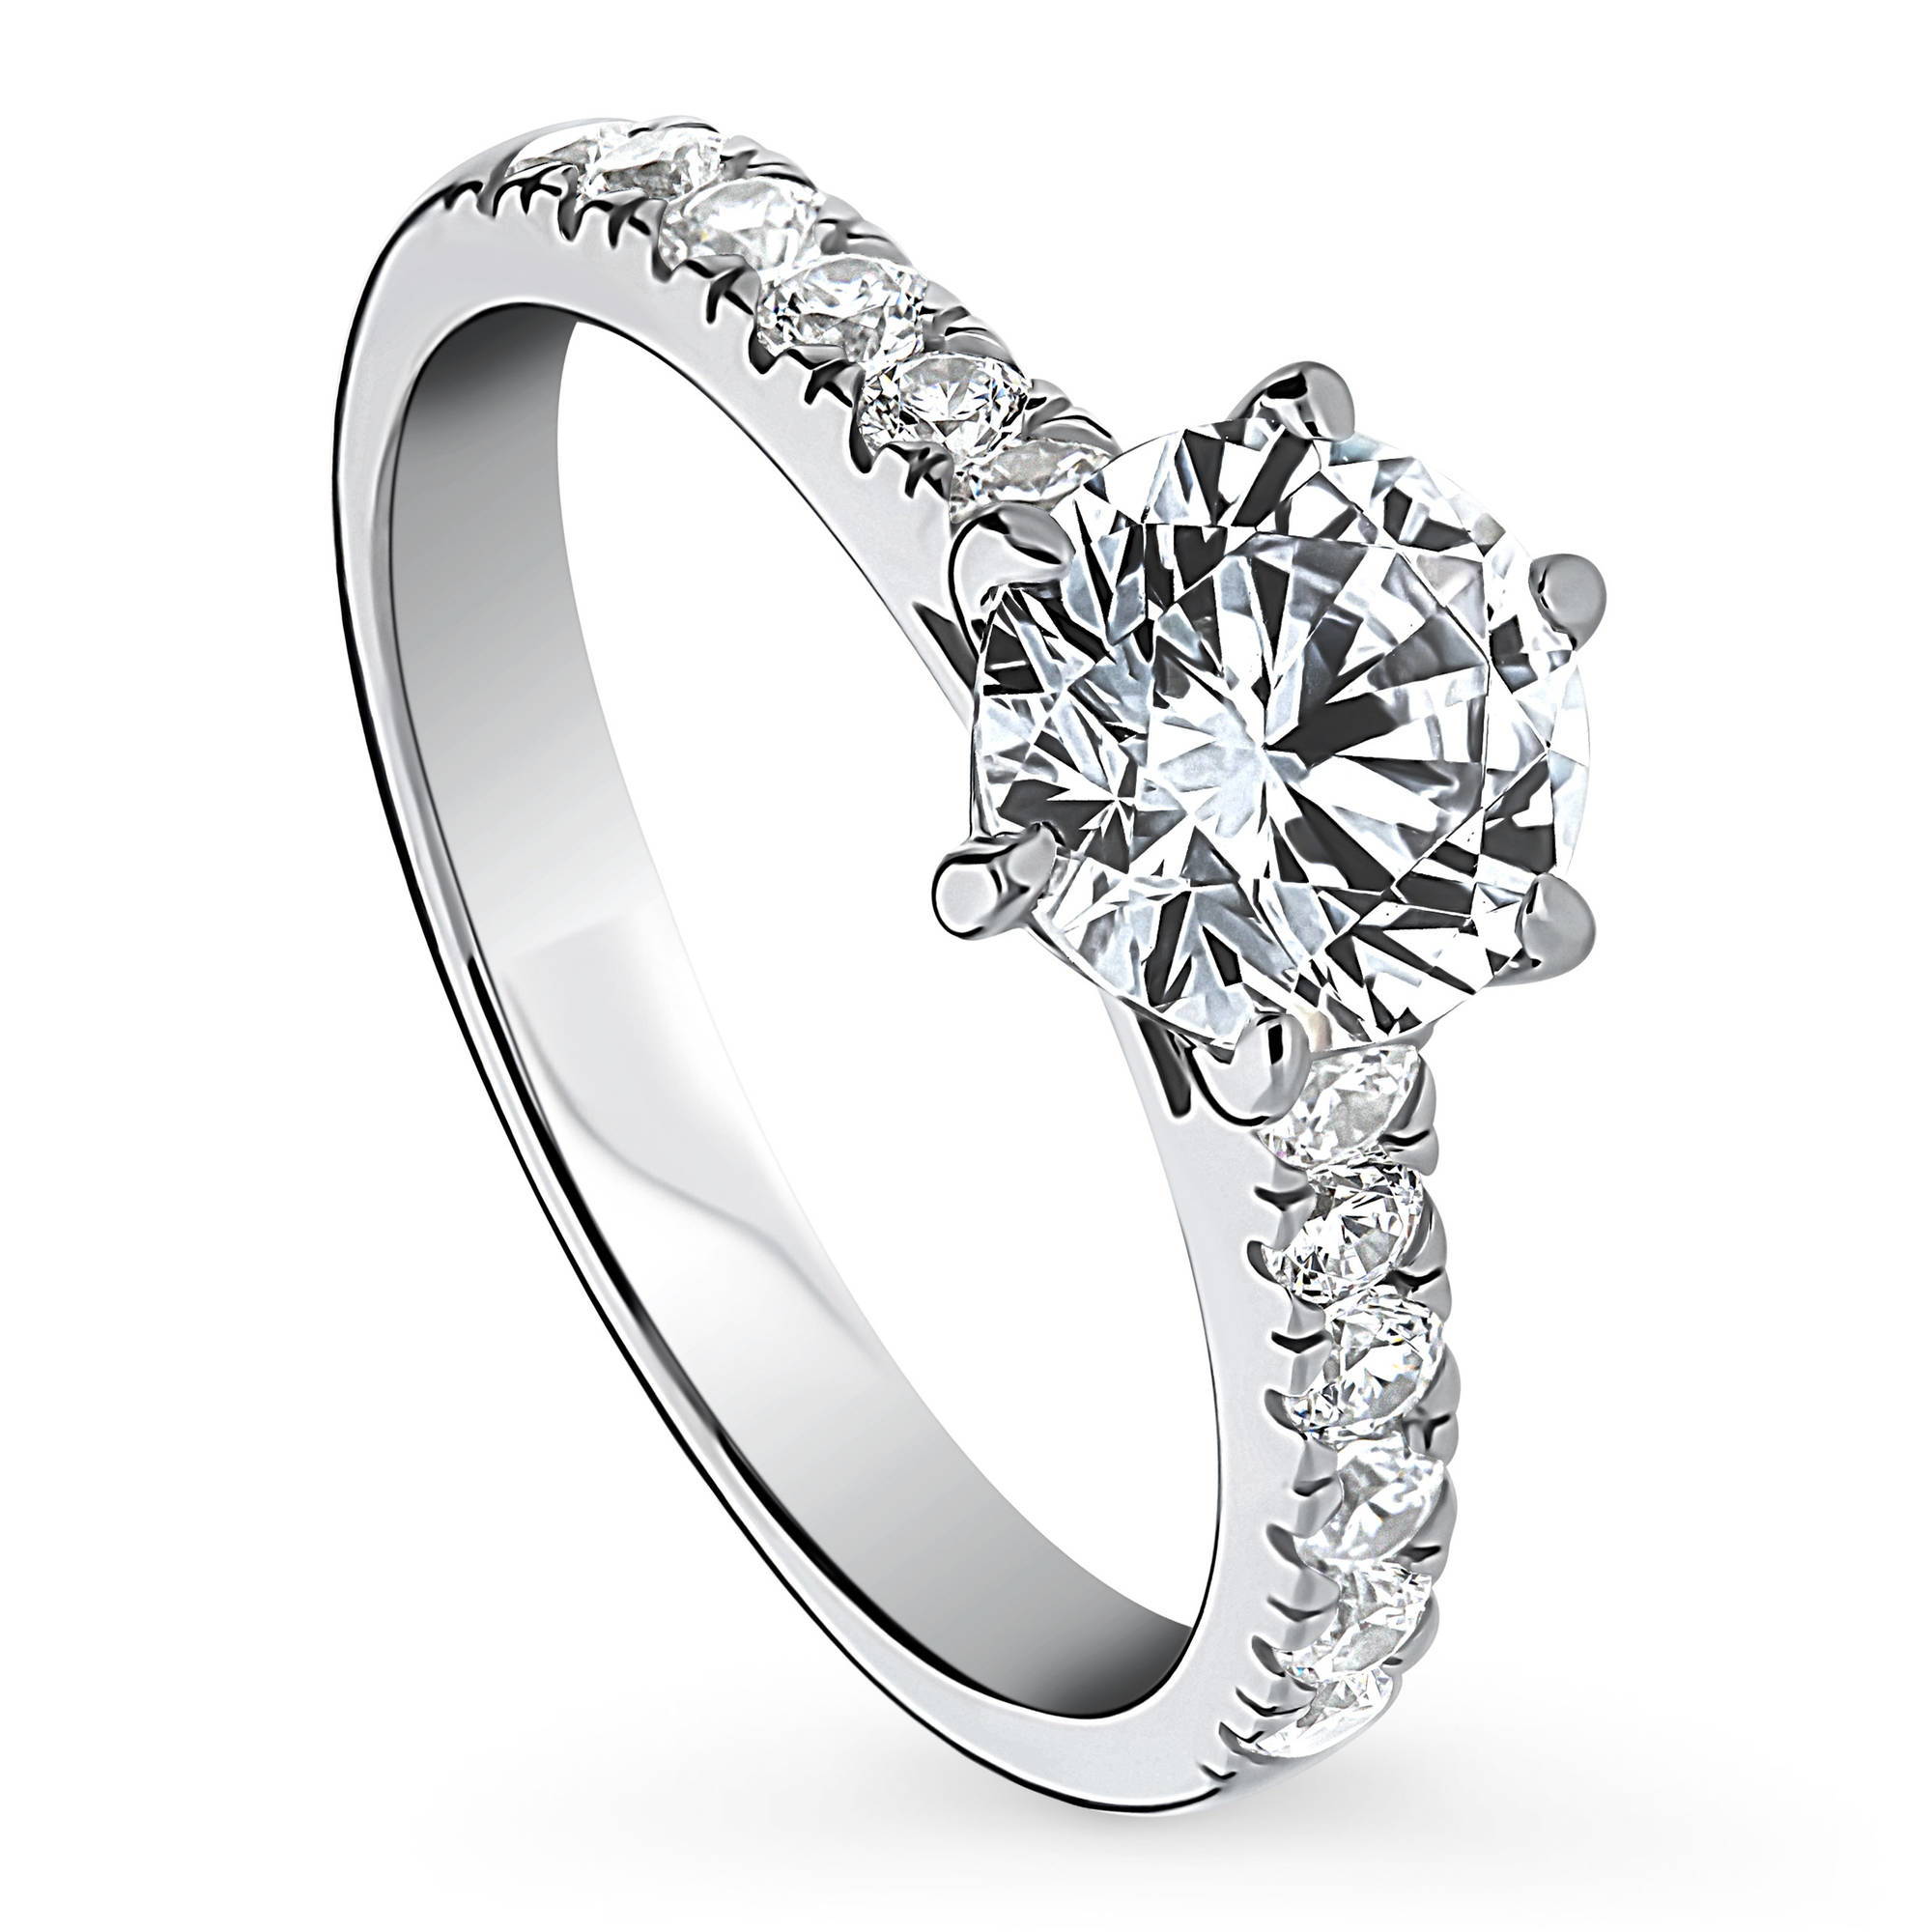 BERRICLE Rhodium Plated Sterling Silver Round Cubic Zirconia CZ Solitaire Promise Engagement Ring 1 CTW